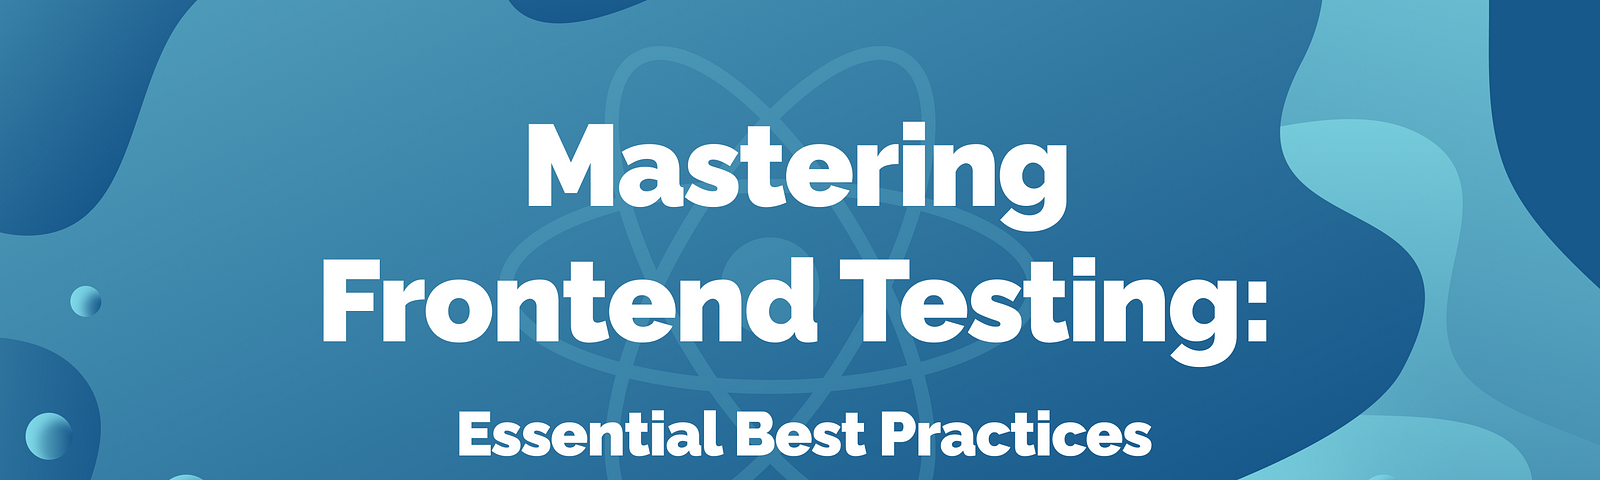 A cover image with blue abstract forms and the title: Mastering Frontend Testing: Essential Best Practices